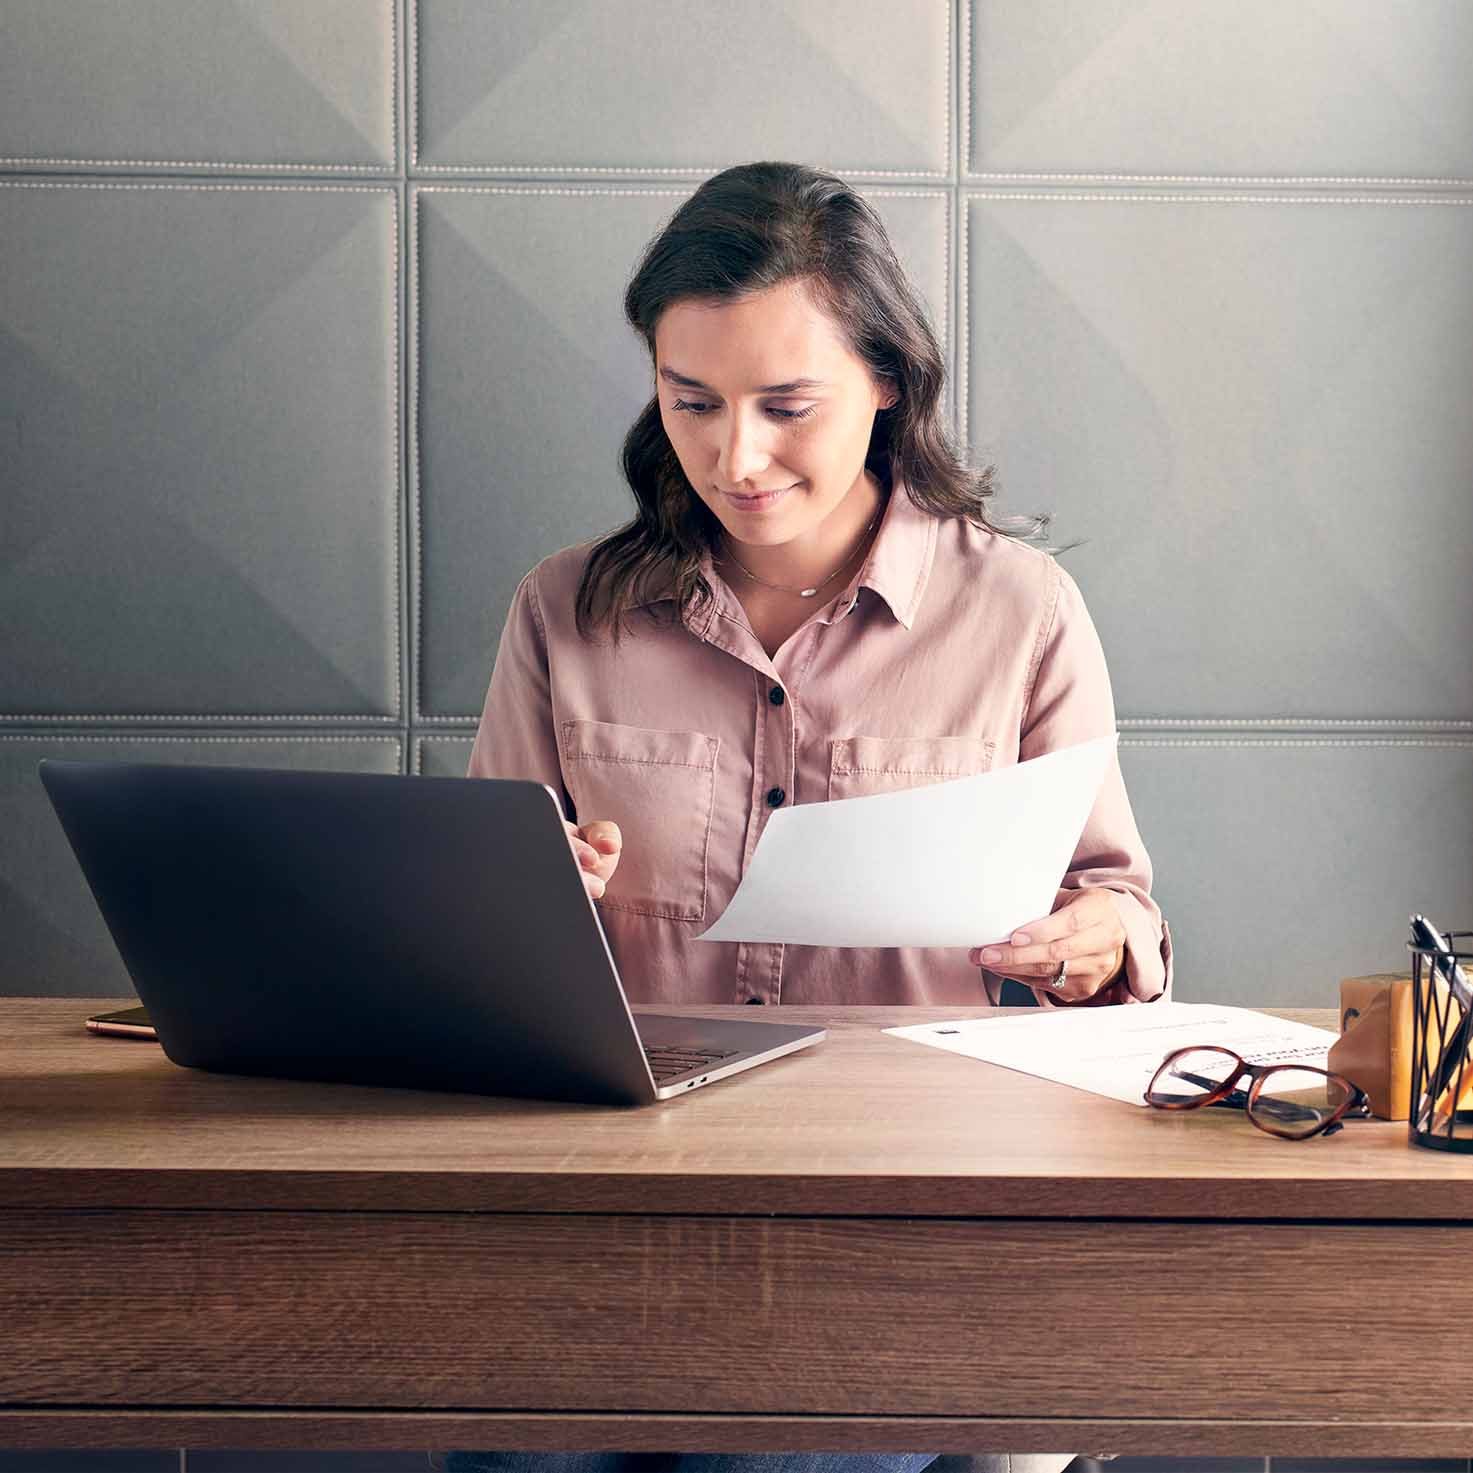 woman filing her taxes on her laptop in home office